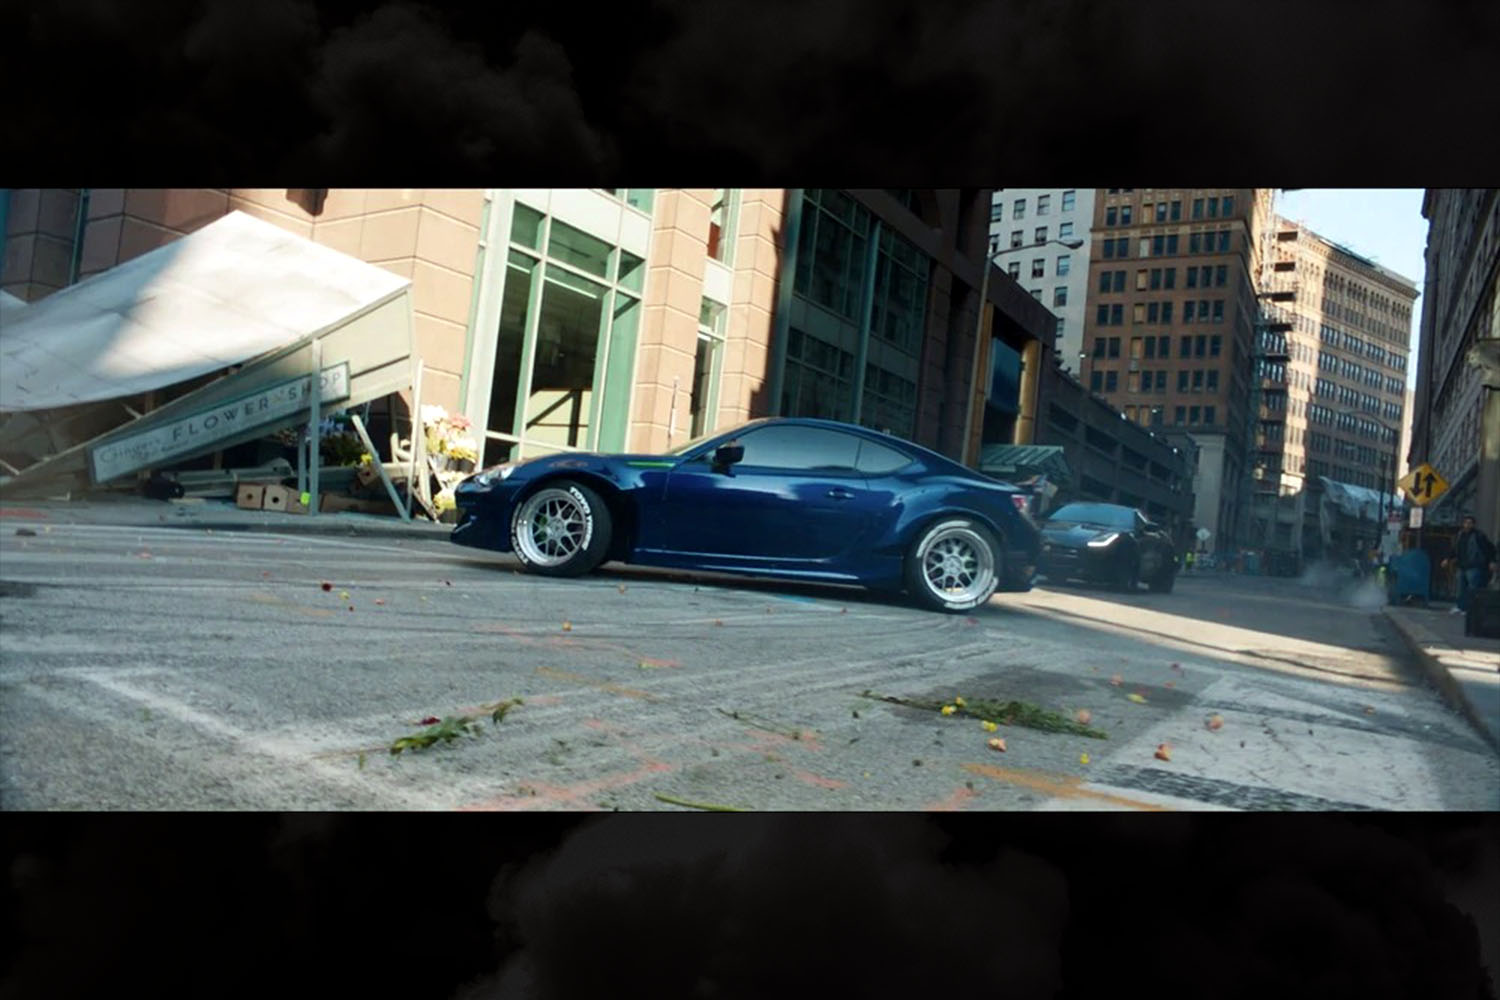 A blue 2017 Subaru BRZ driven by Little Nobody (Scott Eastwood) in The Fate of the Furious. Not an especially memorable car.